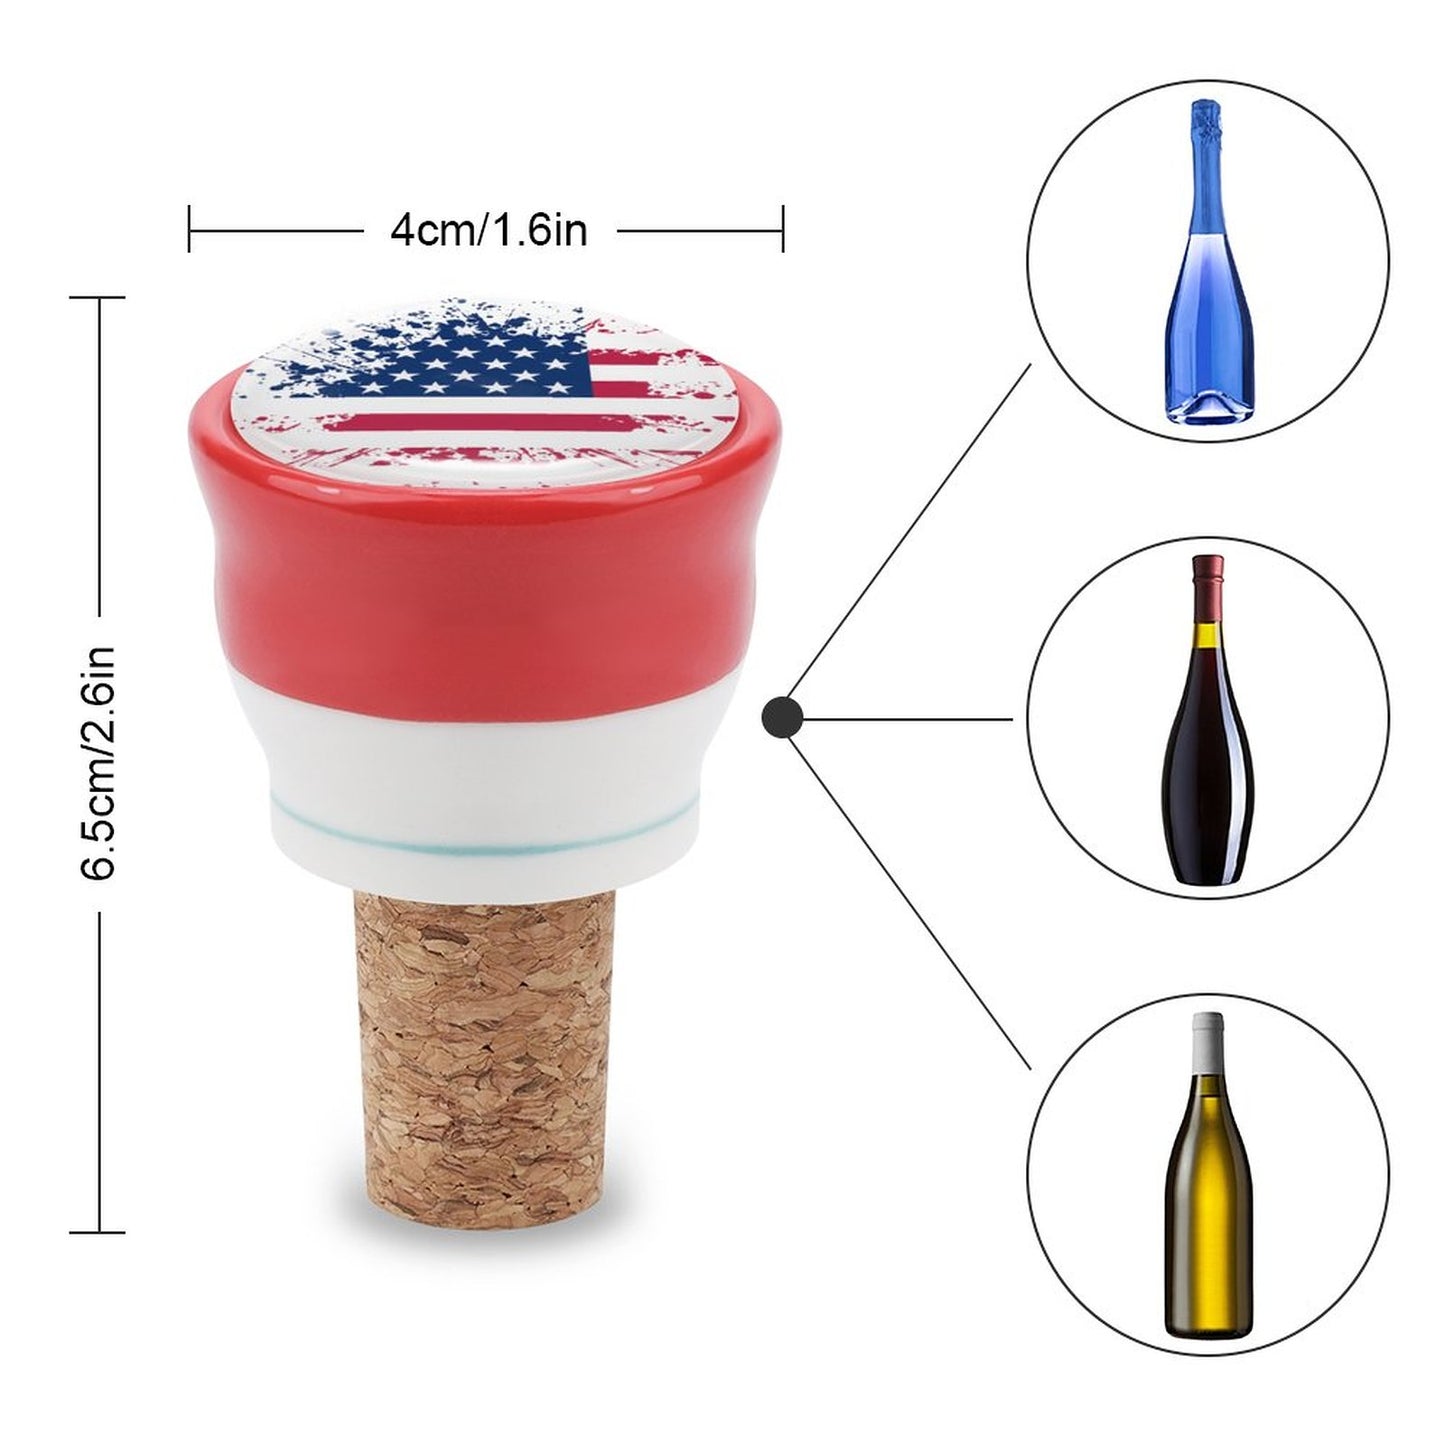 Online Customize Wine Bottle Stoppers Ceramics